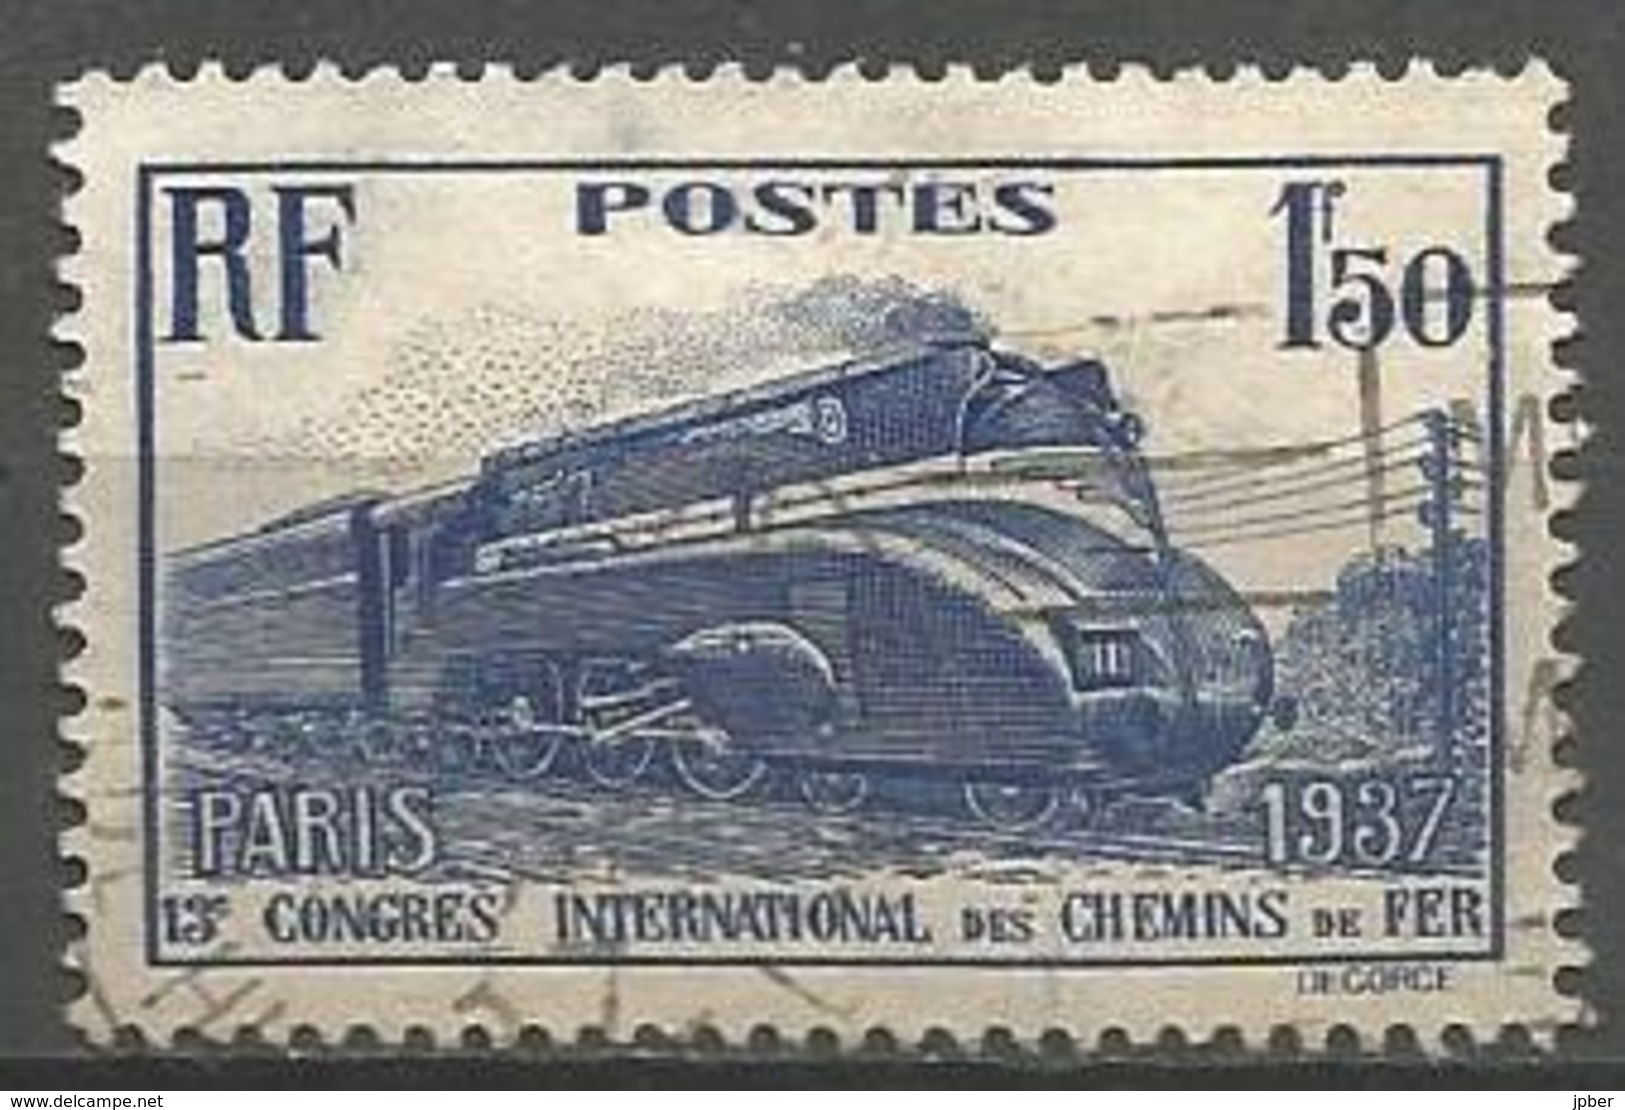 France - F1/320 - N°340  Obl. - Locomotive "Pacific" - Used Stamps